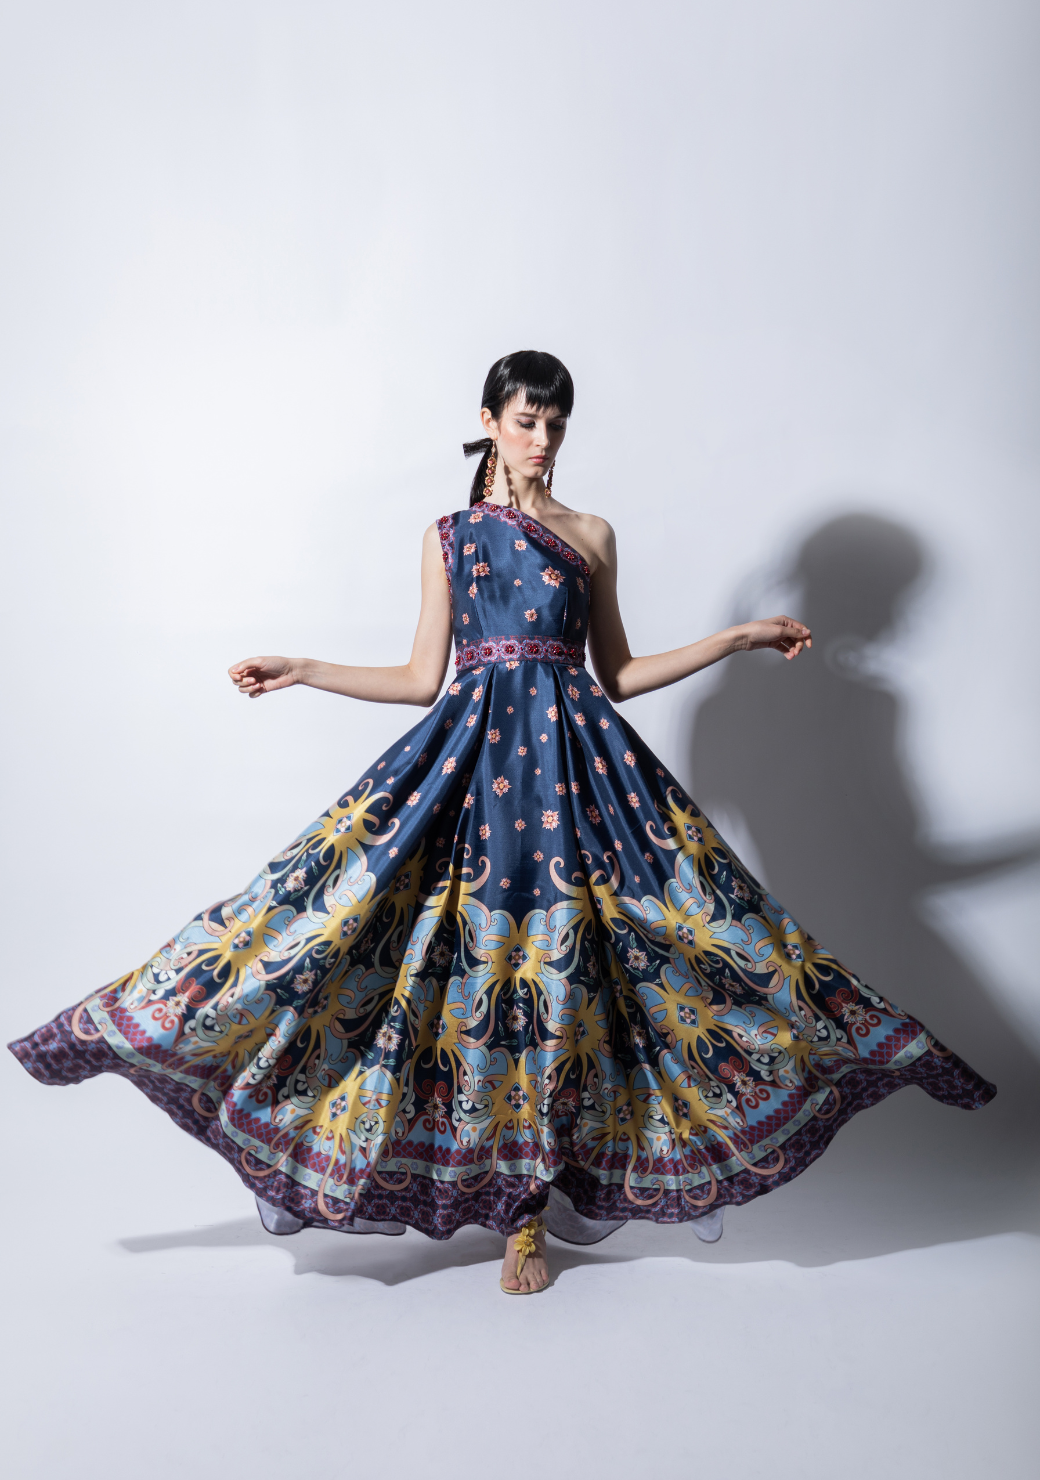 Tulur Asymetrical Dress with Paneled Skirt in Navy